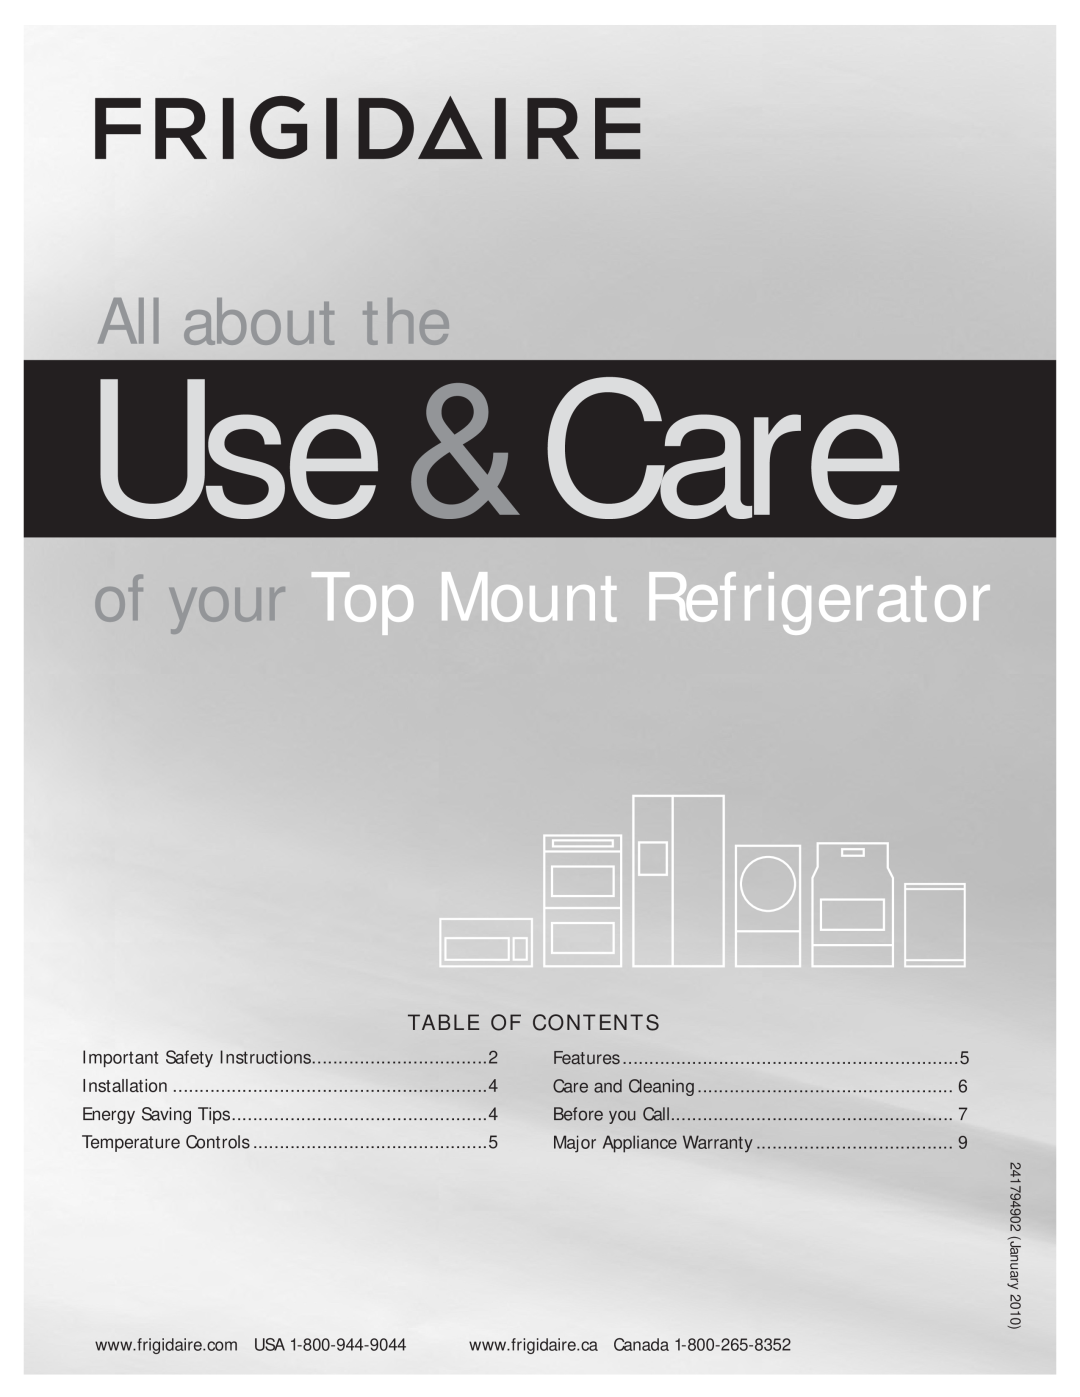 Frigidaire FFPT12F3MB important safety instructions Use &Care, of your Top Mount Refrigerator, All about the, January 